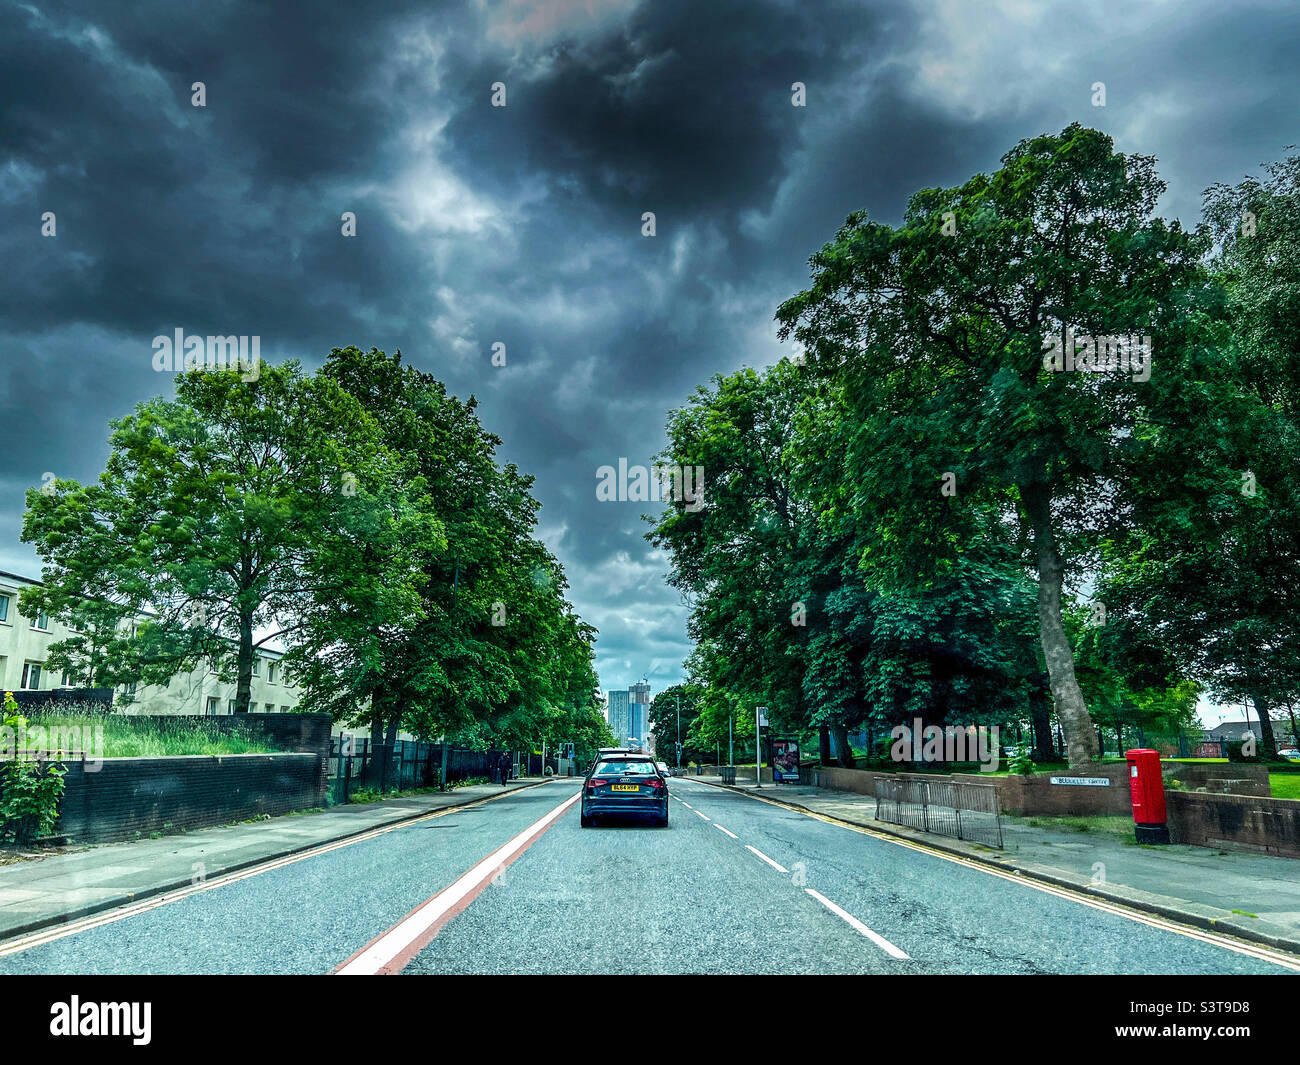 Bury New Road into Manchester City centre during stormy skies Stock Photo